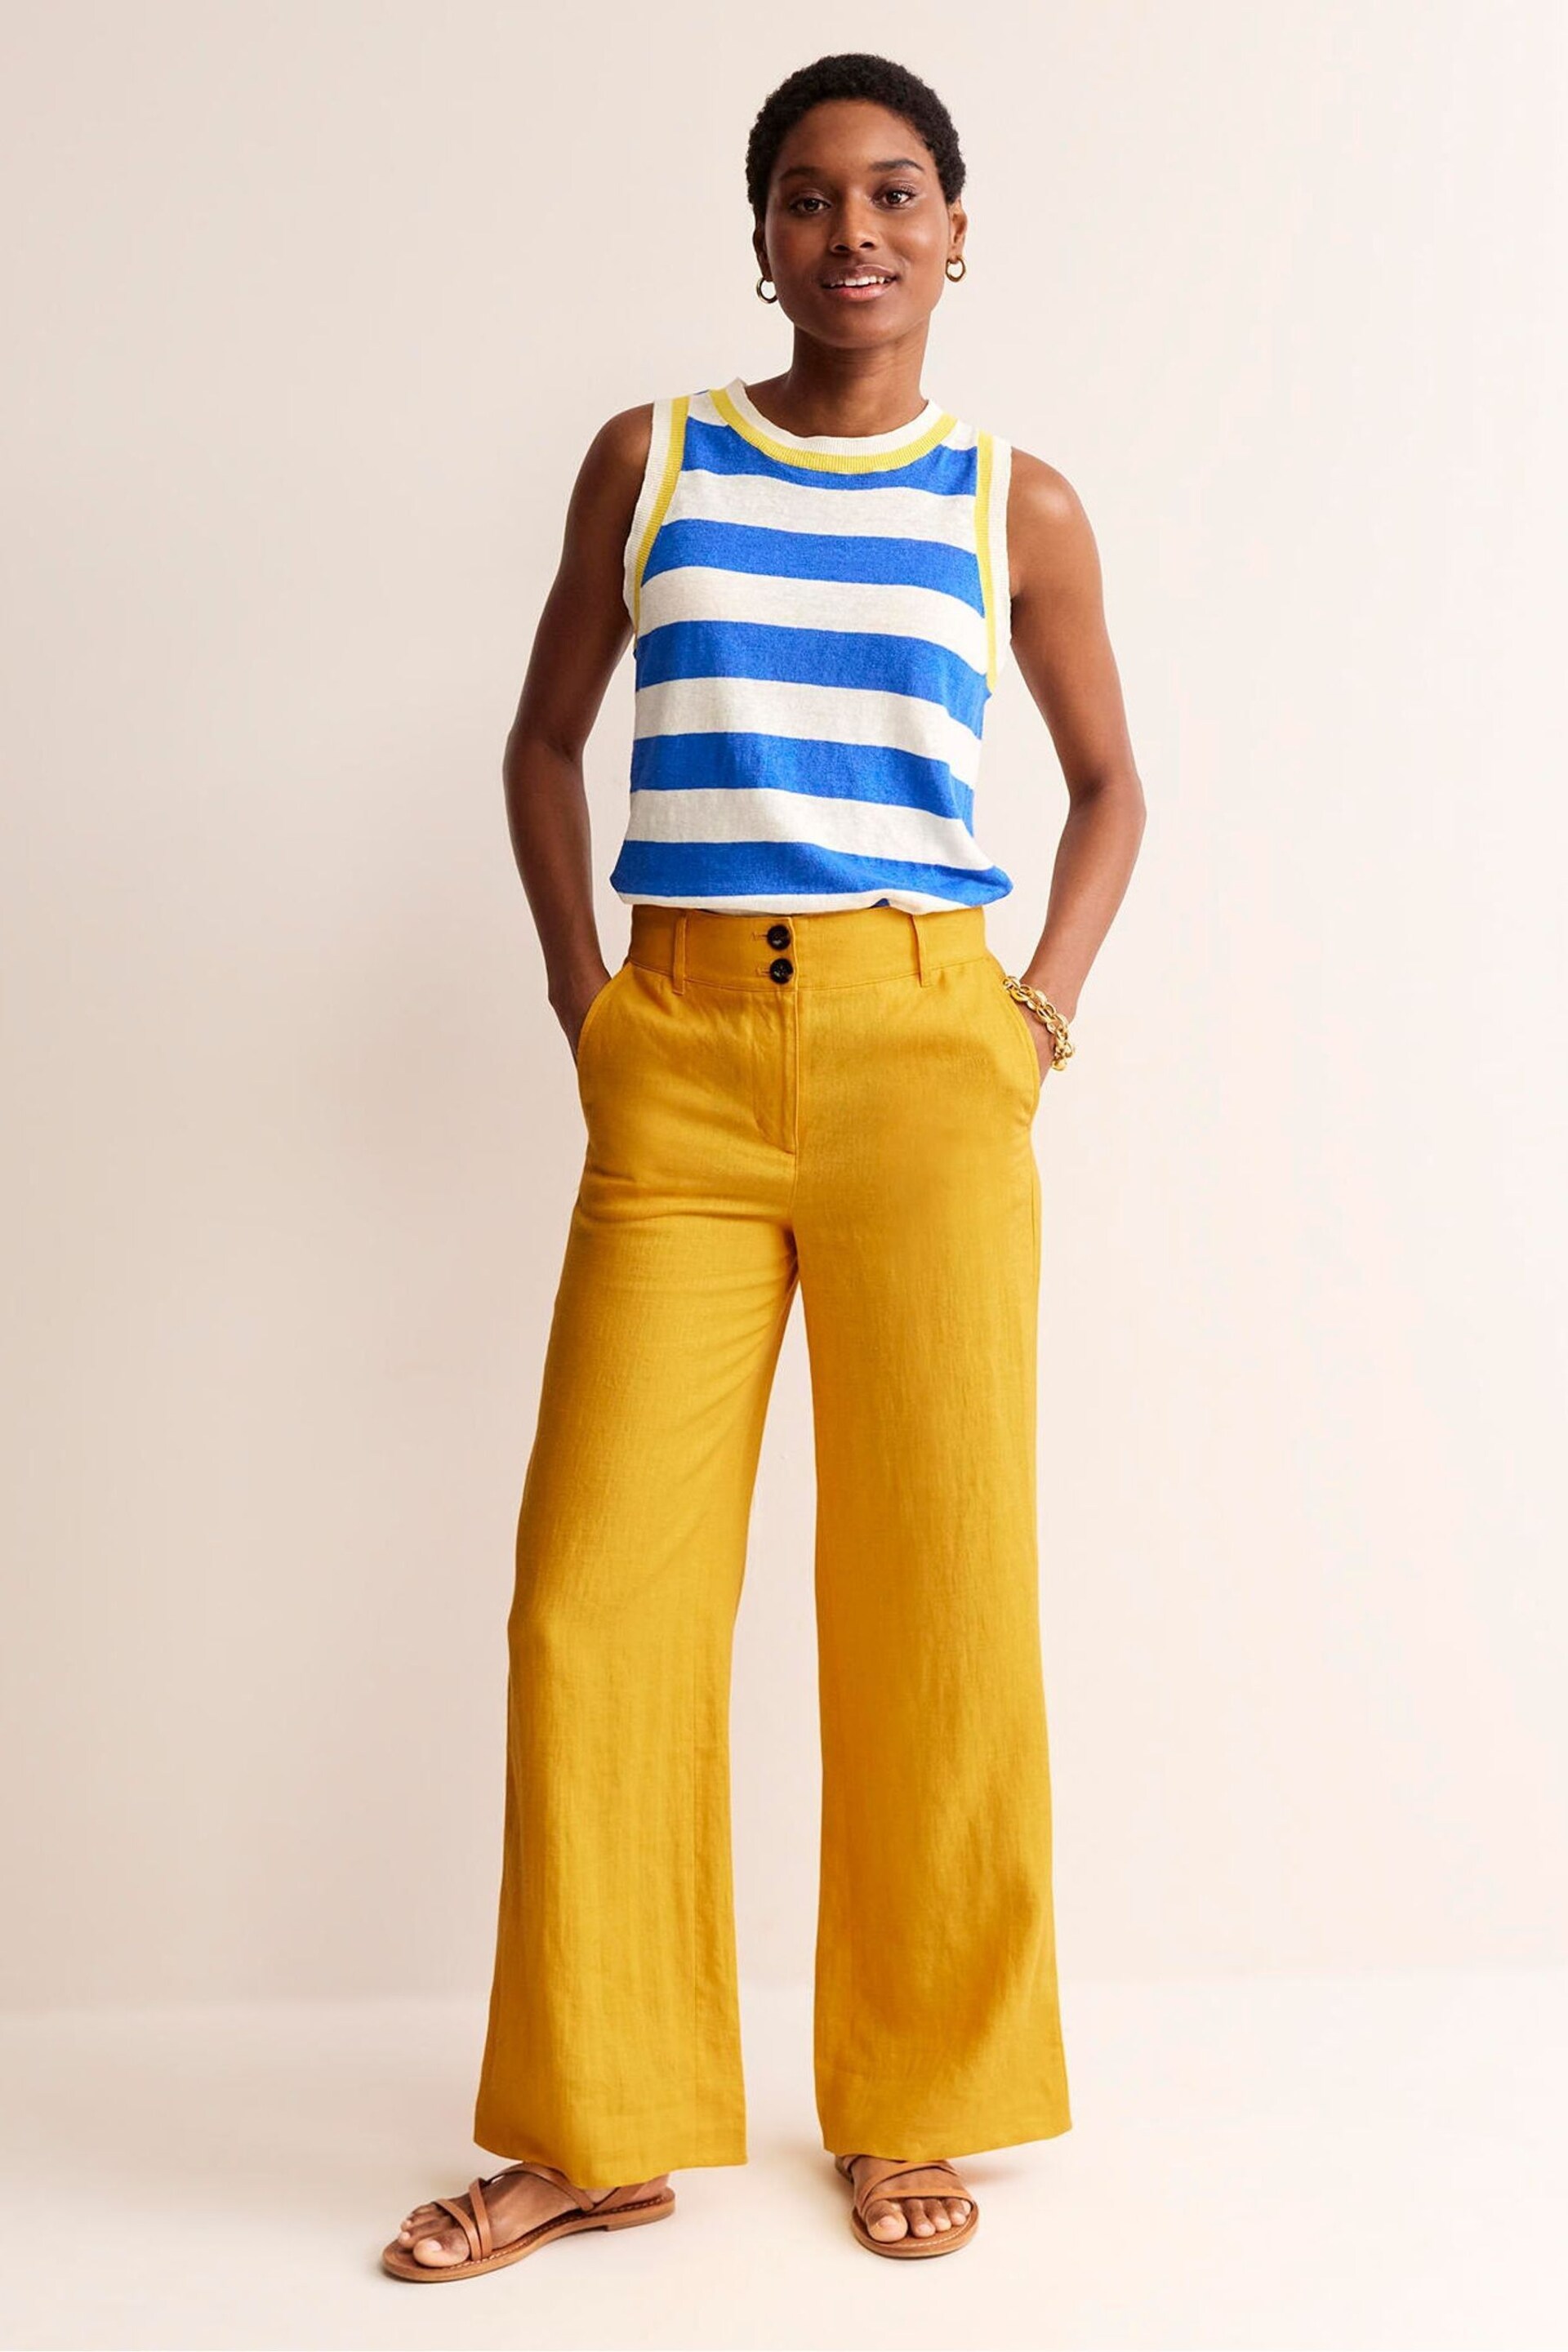 Boden Yellow Petite Westbourne Linen Trousers - Image 1 of 5